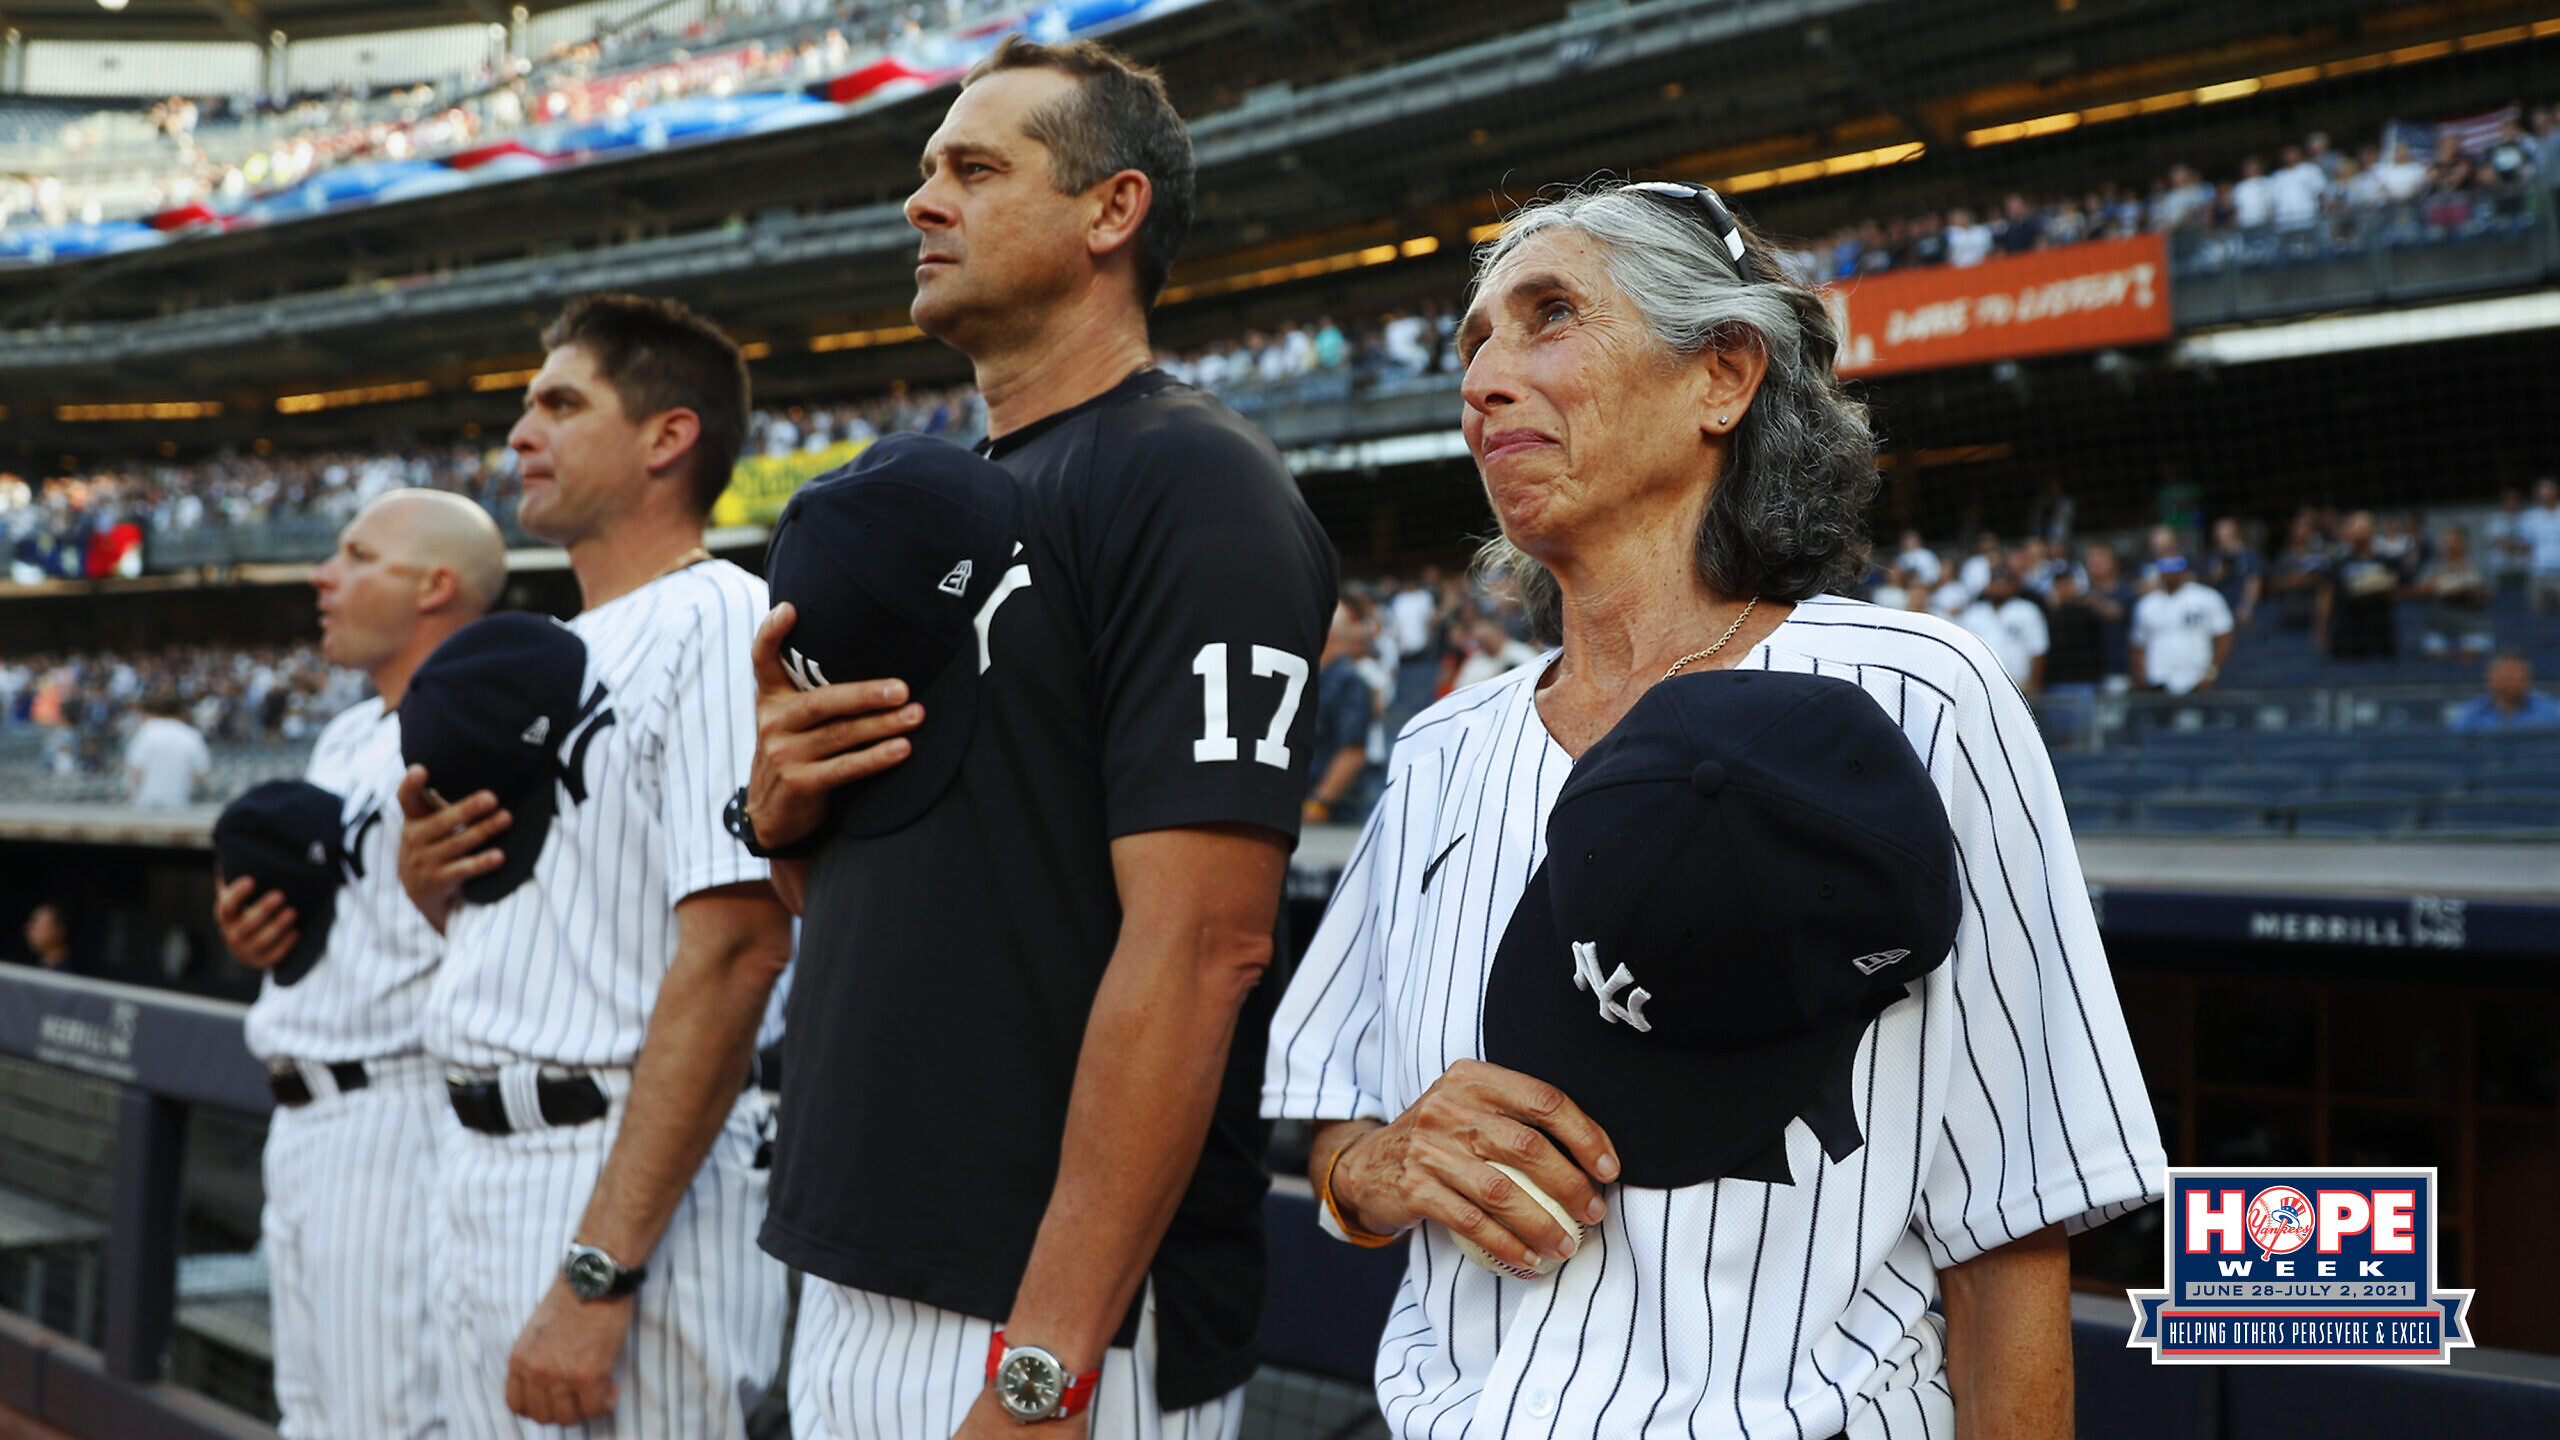 New York Yankees Hope Week helping others persevere and excel logo